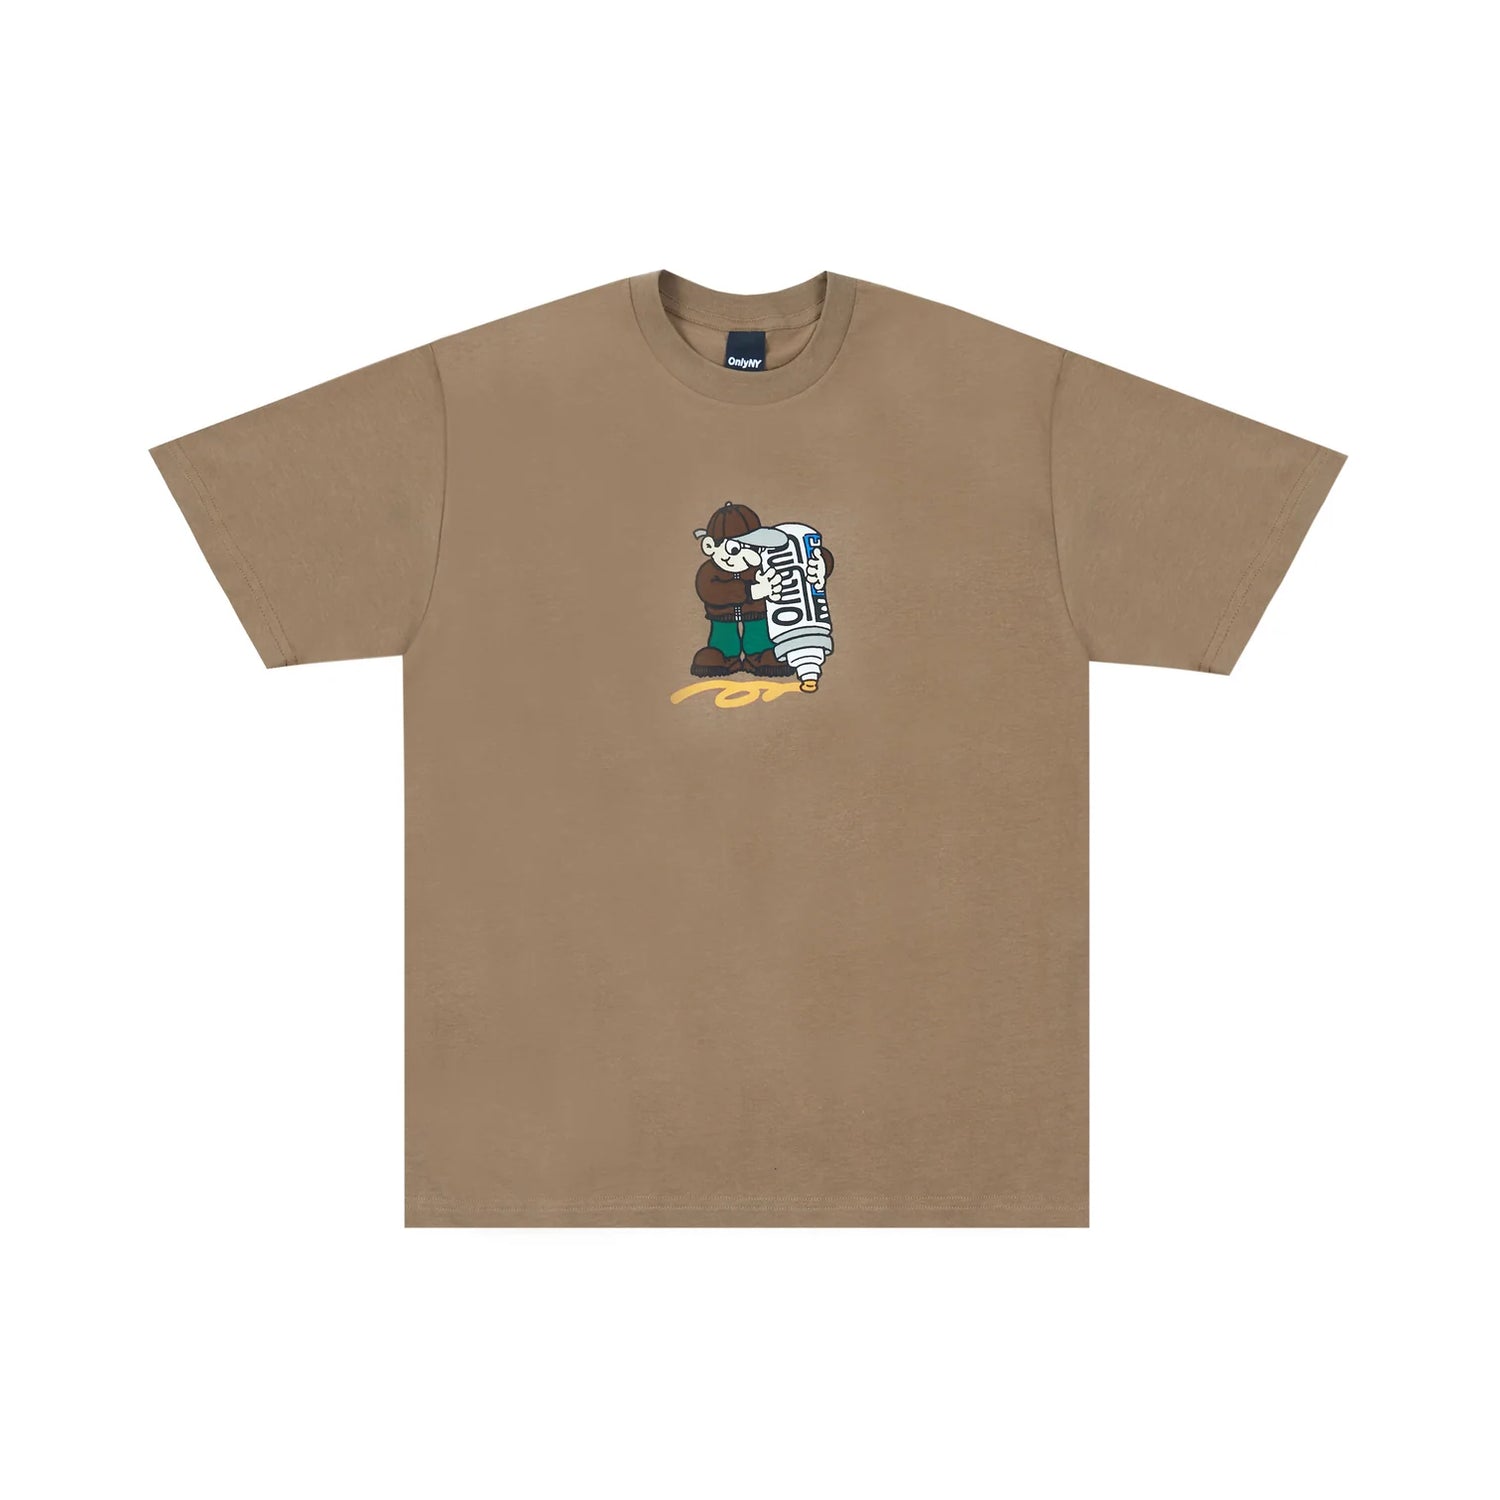 Only NY Graff Writer T-Shirt - Brown